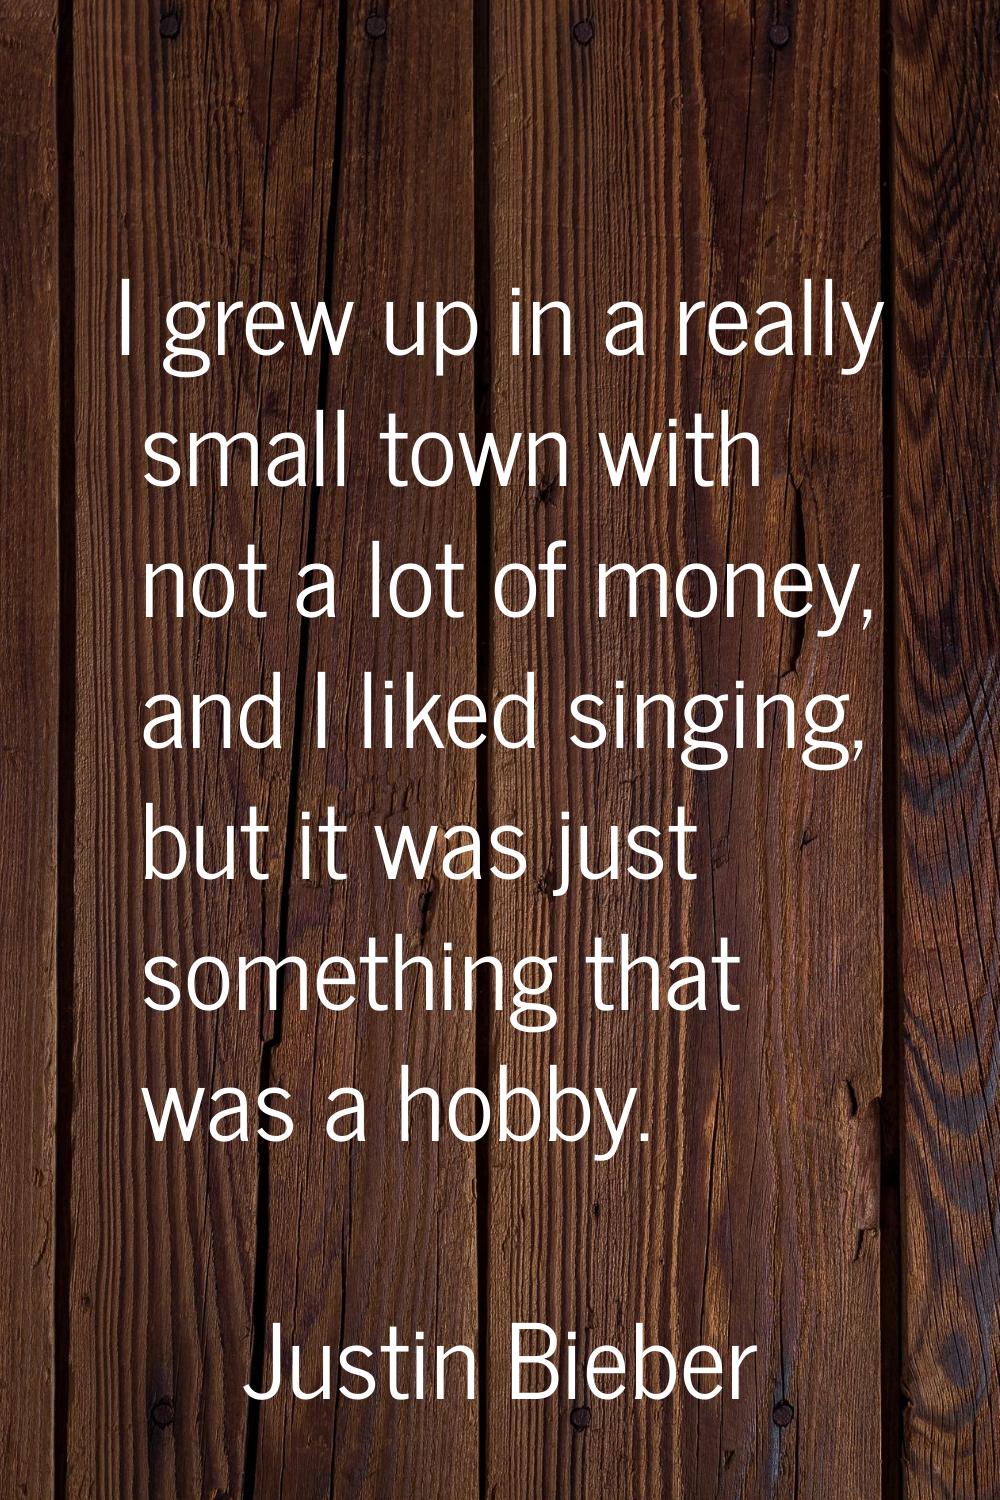 I grew up in a really small town with not a lot of money, and I liked singing, but it was just some